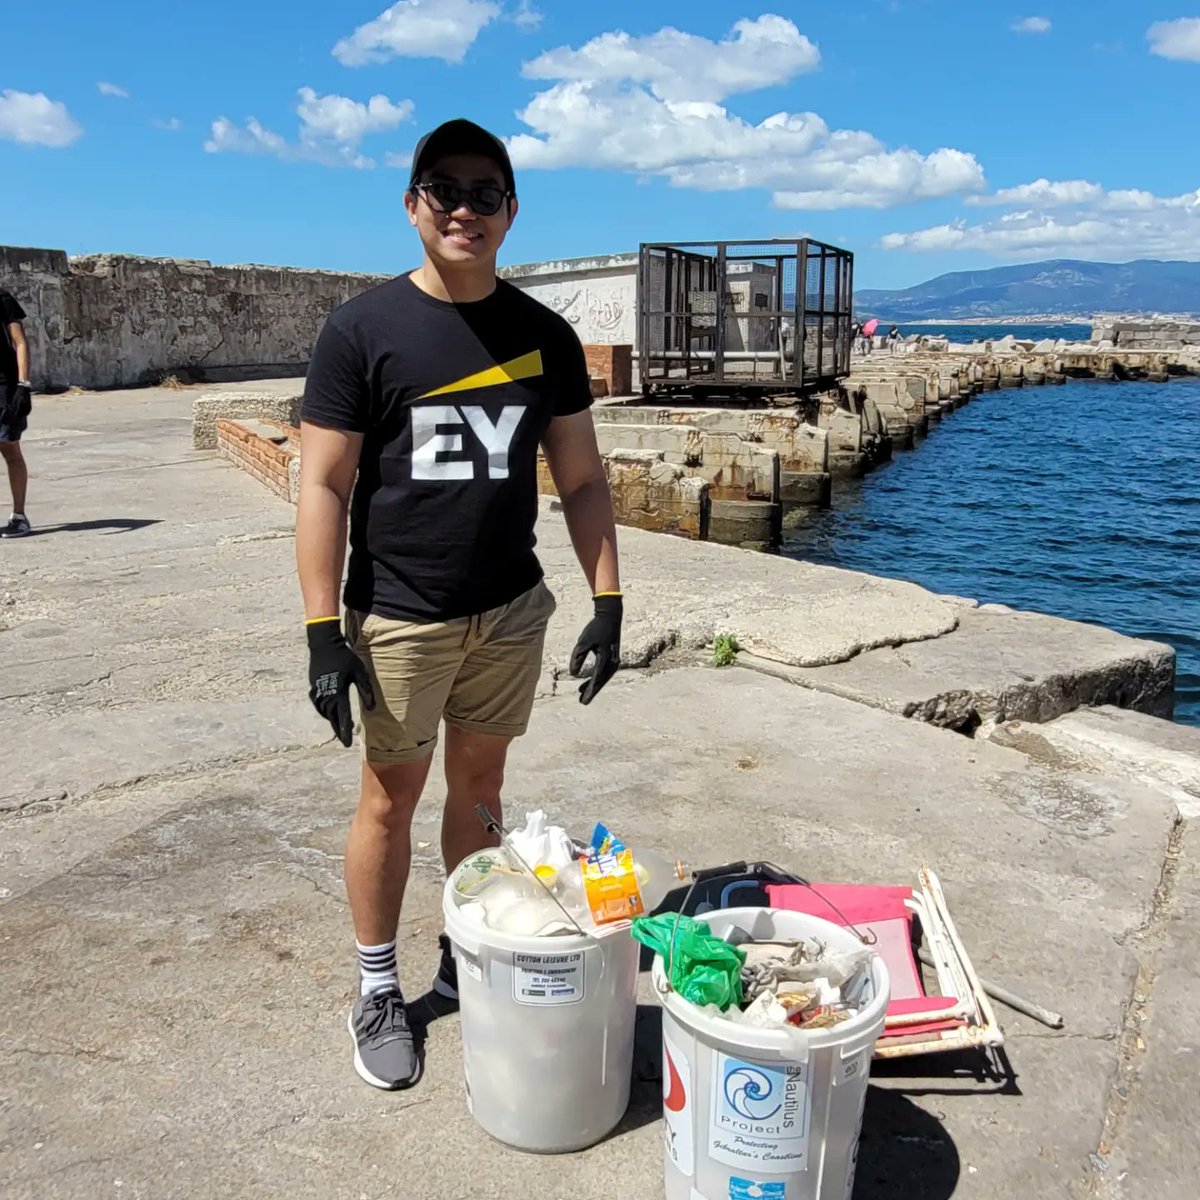 #HistoricRosiaBay is one of our favourite spots, special in so many ways! EY joined us for the 90th #GreatGibraltarBeachClean and in less than an hour, this inspiring group of people retrieved 180kg of debris! #LivingGreen #Gibraltar #BeachClean #MedOceanHeroes